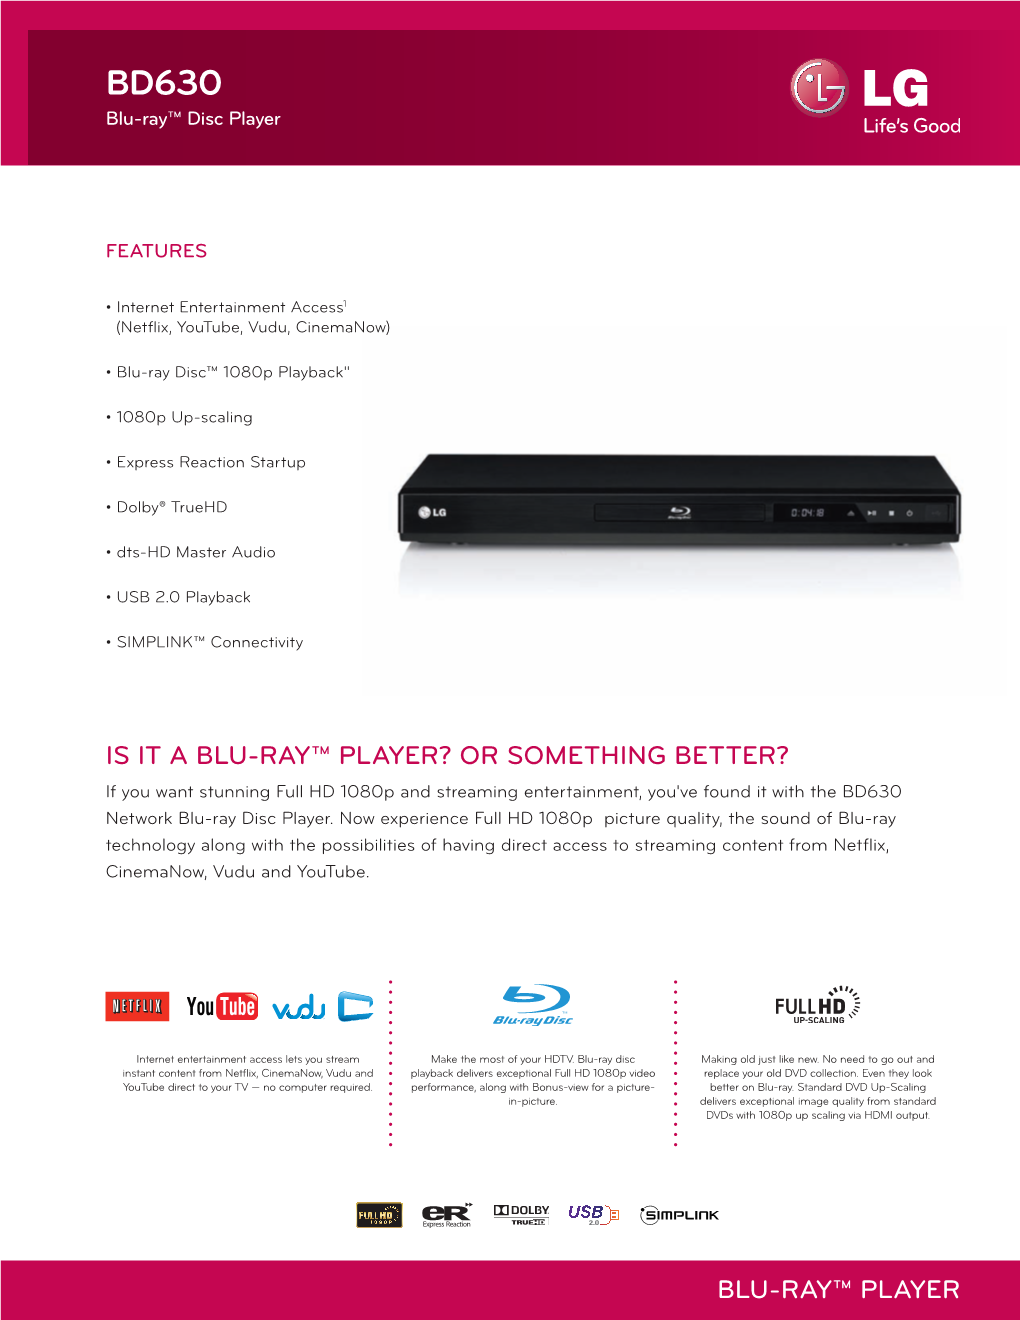 Blu-Ray™ Player Is It a Blu-Ray™ Player?